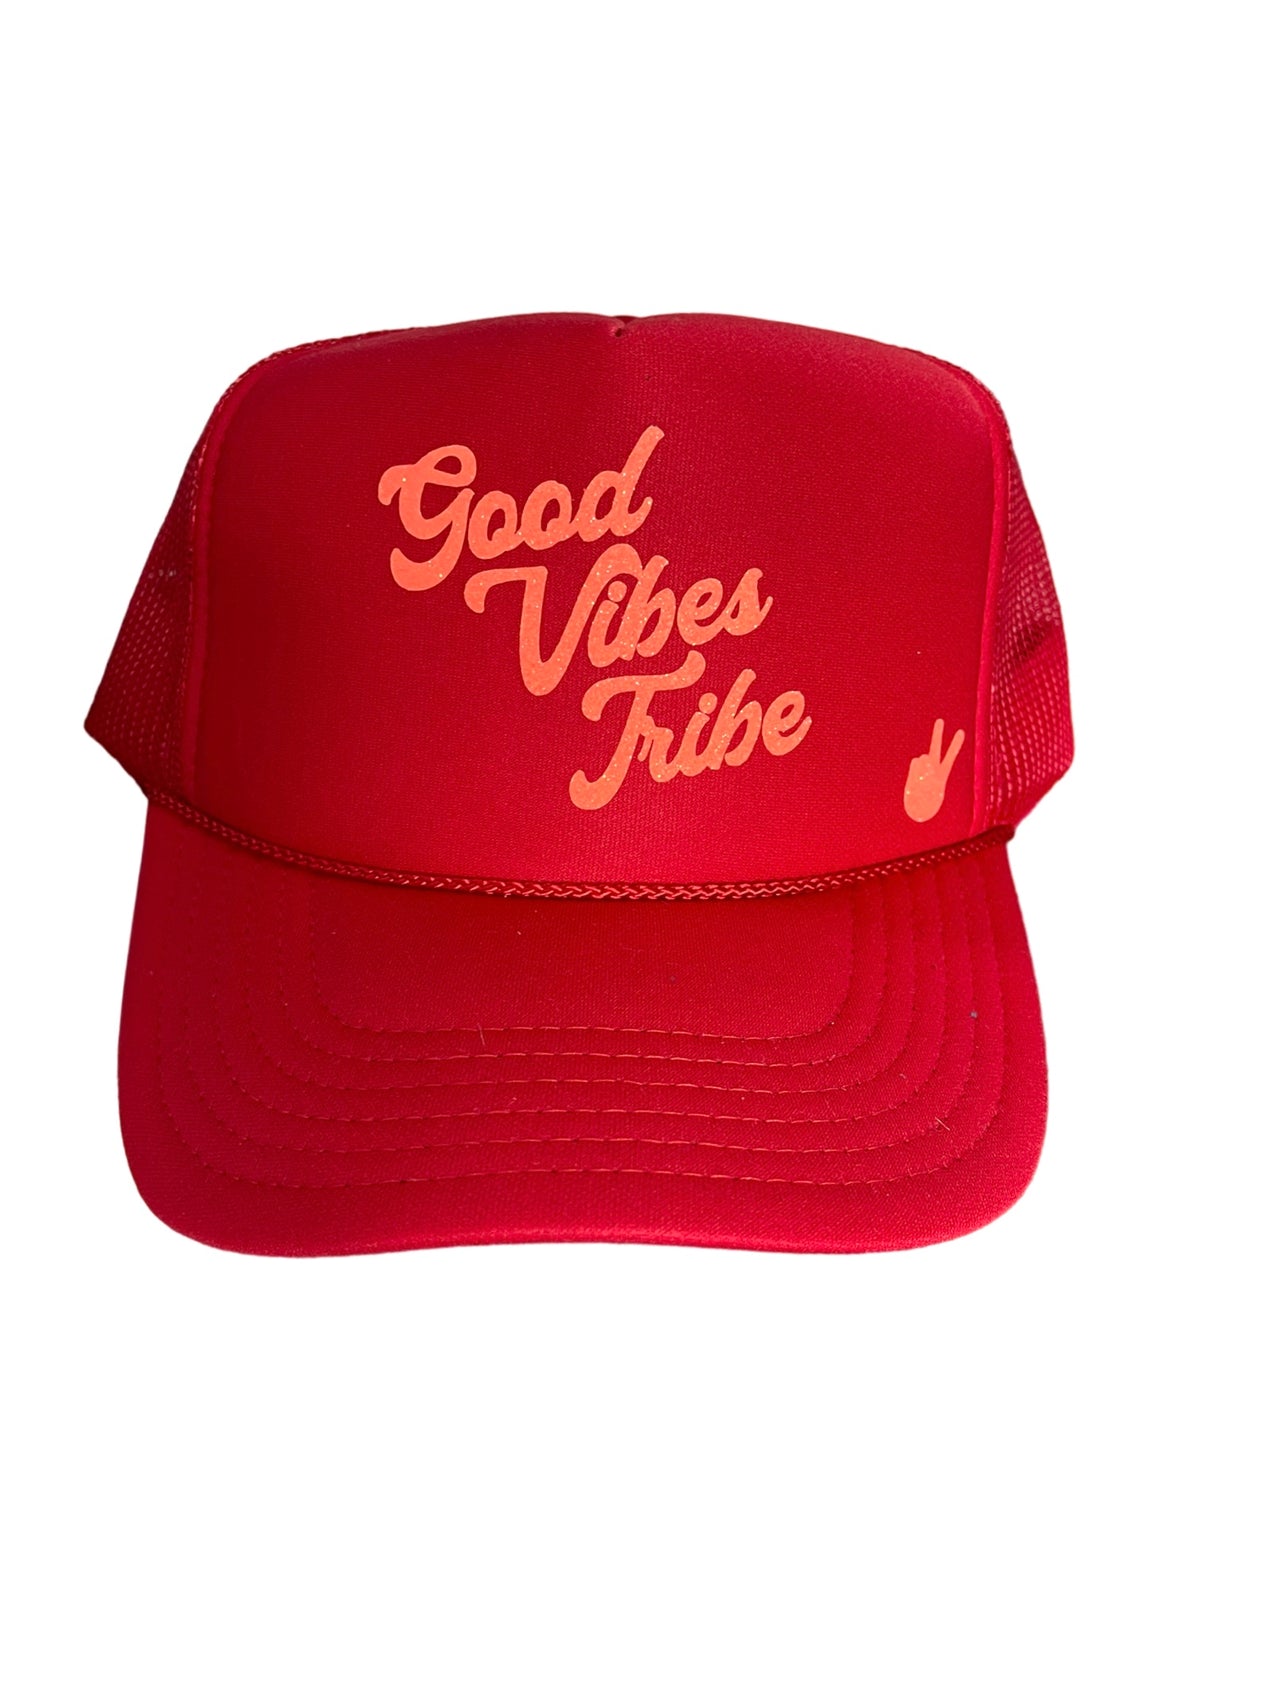 Good Vibes Tribe Red Trucker